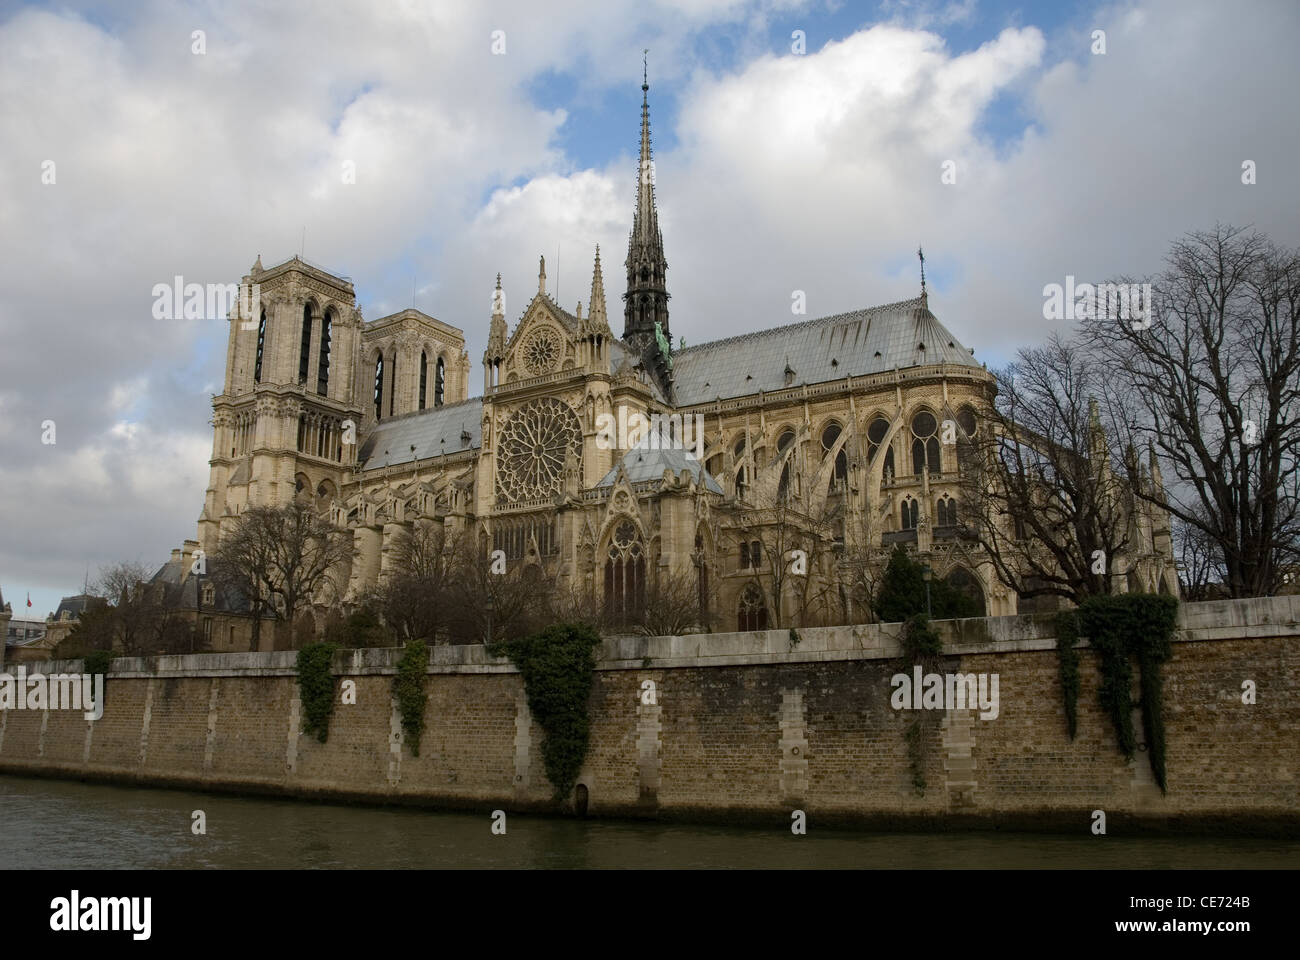 Notre Dame Cathedral, Paris, France, on a cold, gloomy day Stock Photo